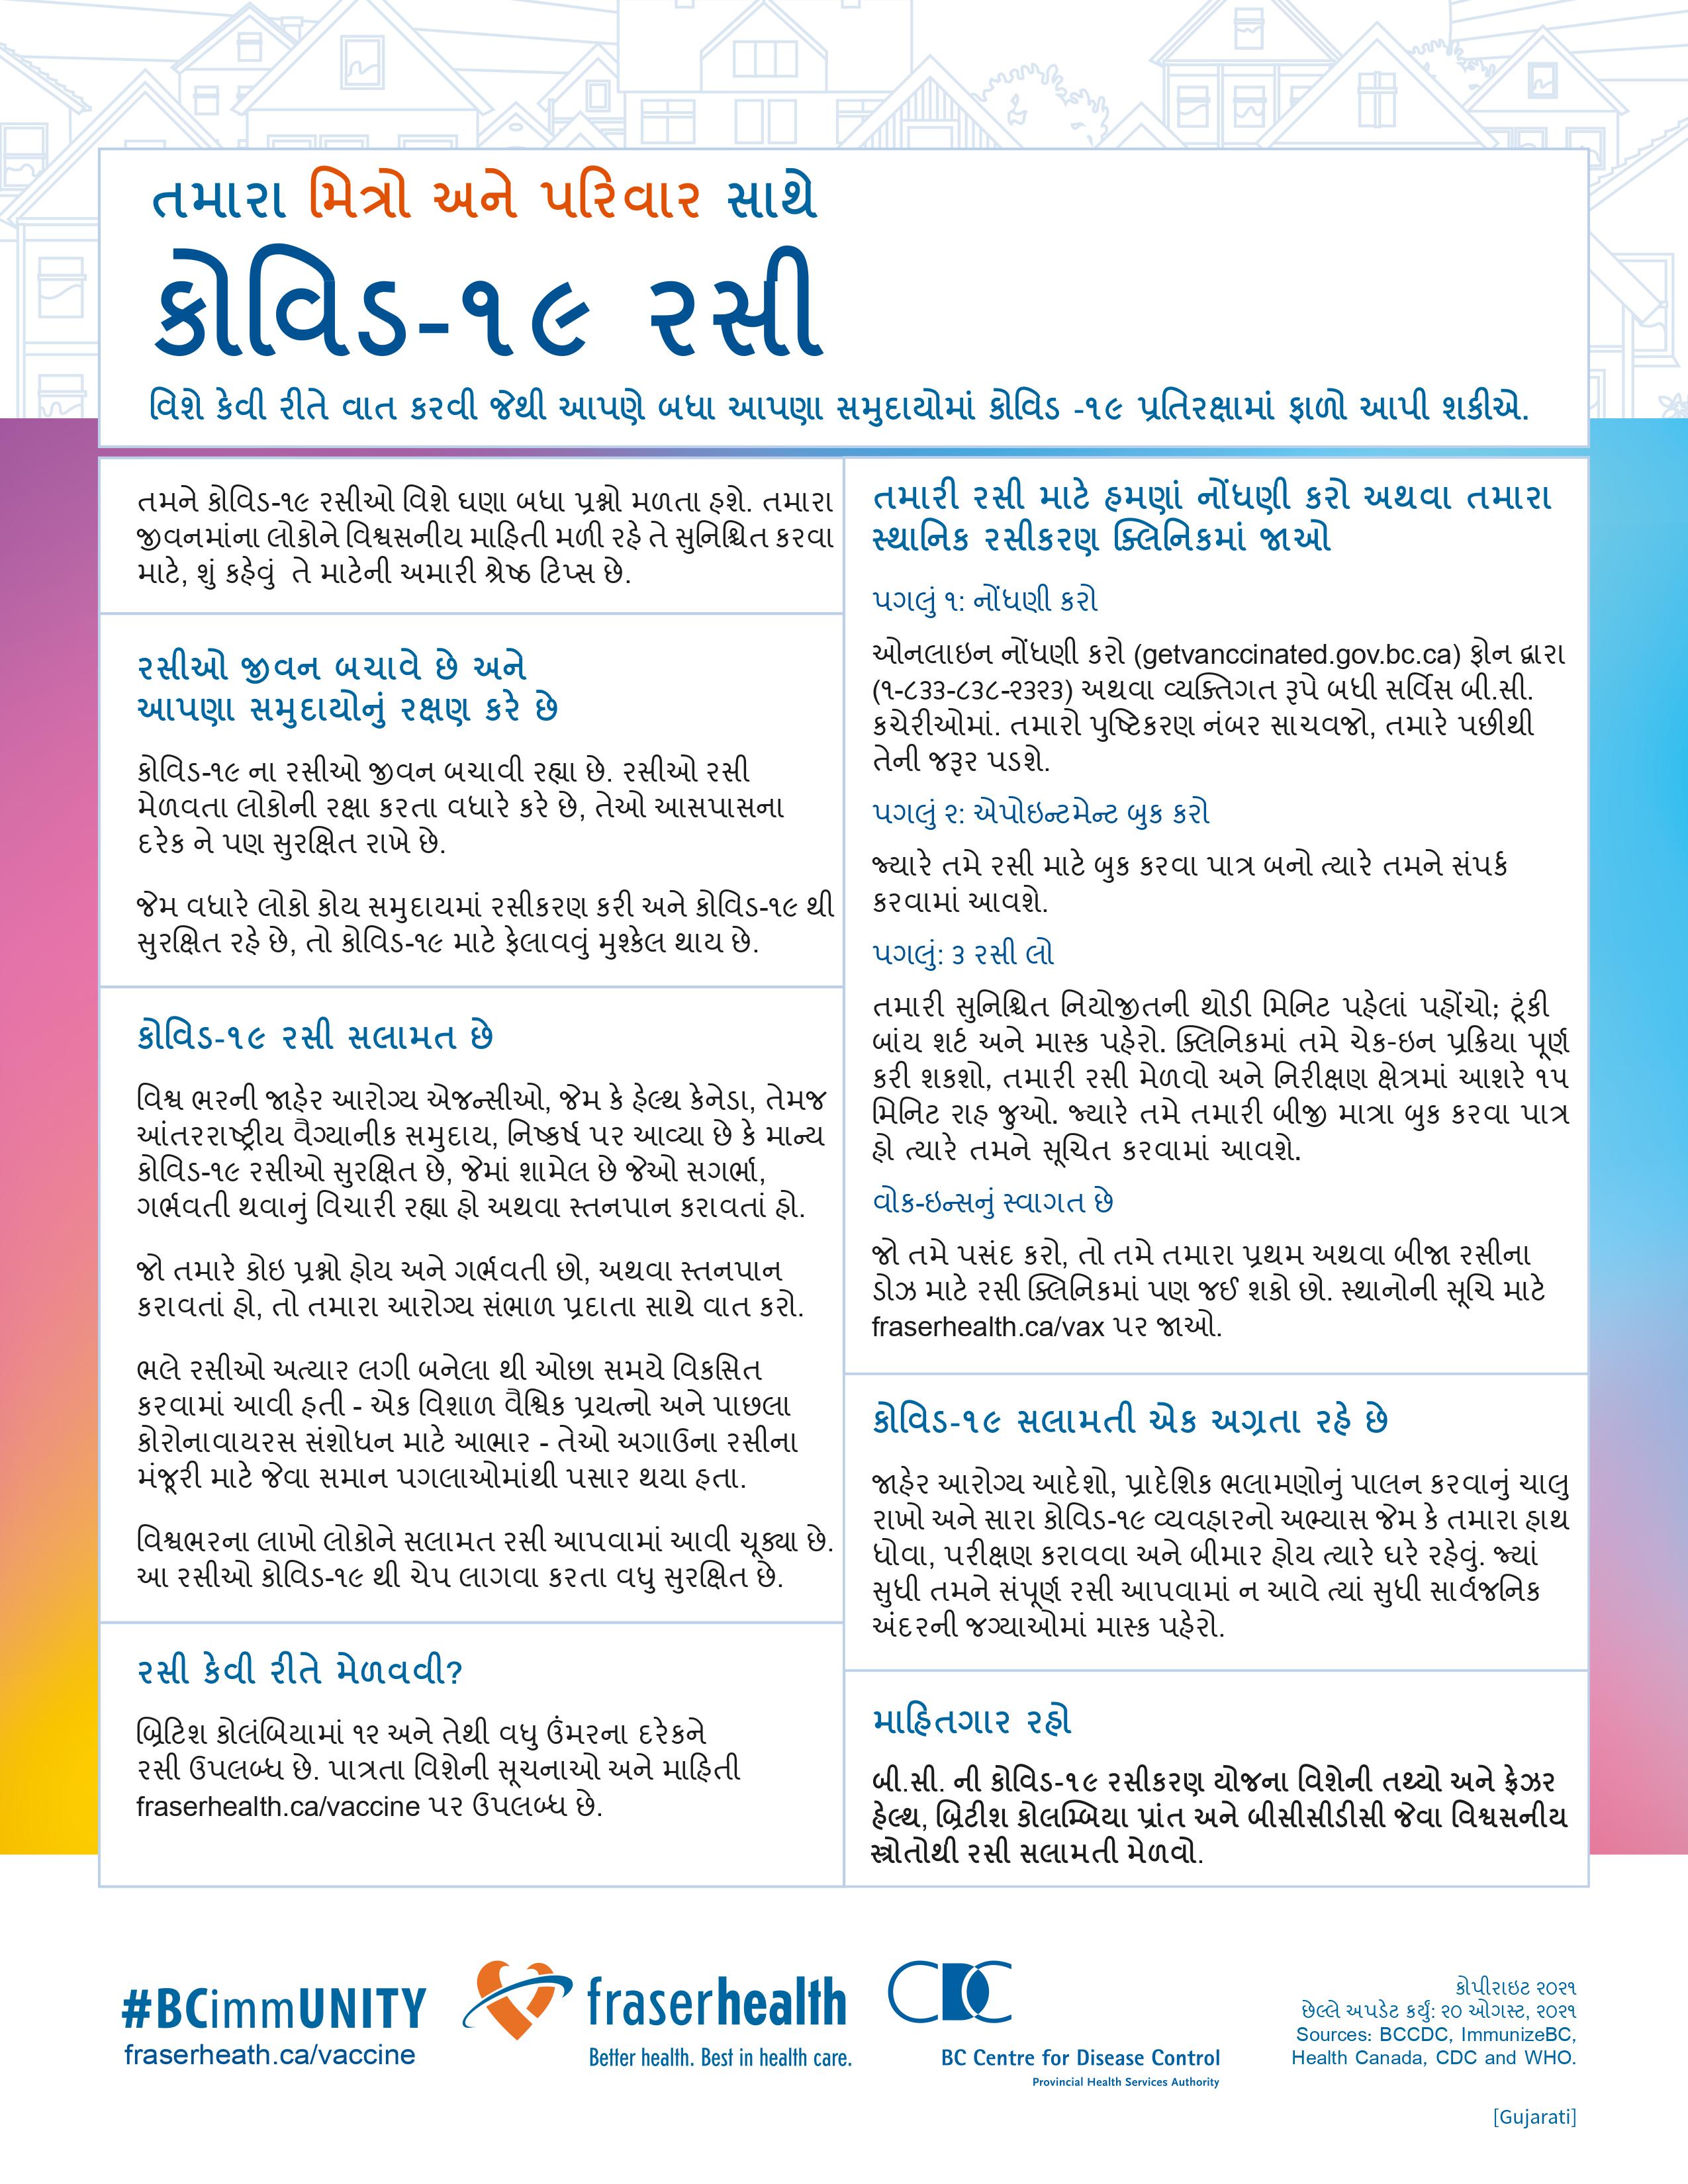 Infographic on how to talk to your friends about COVID-19 vaccines in Gujarati